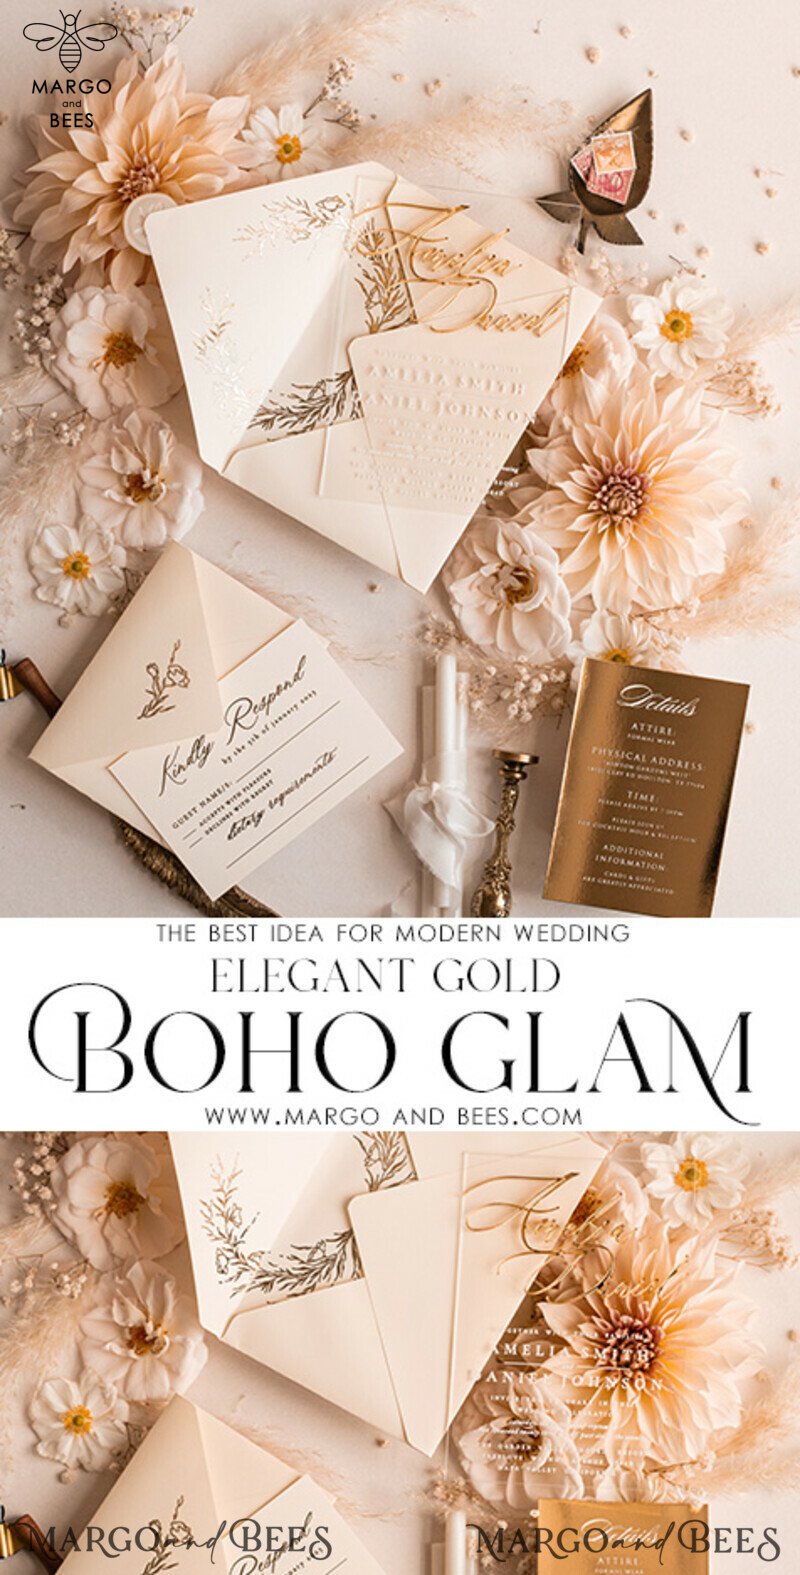 Luxury Gold Wedding Cards: Acrylic Glamour Wedding Invitation Suite with a Golden Shine-3